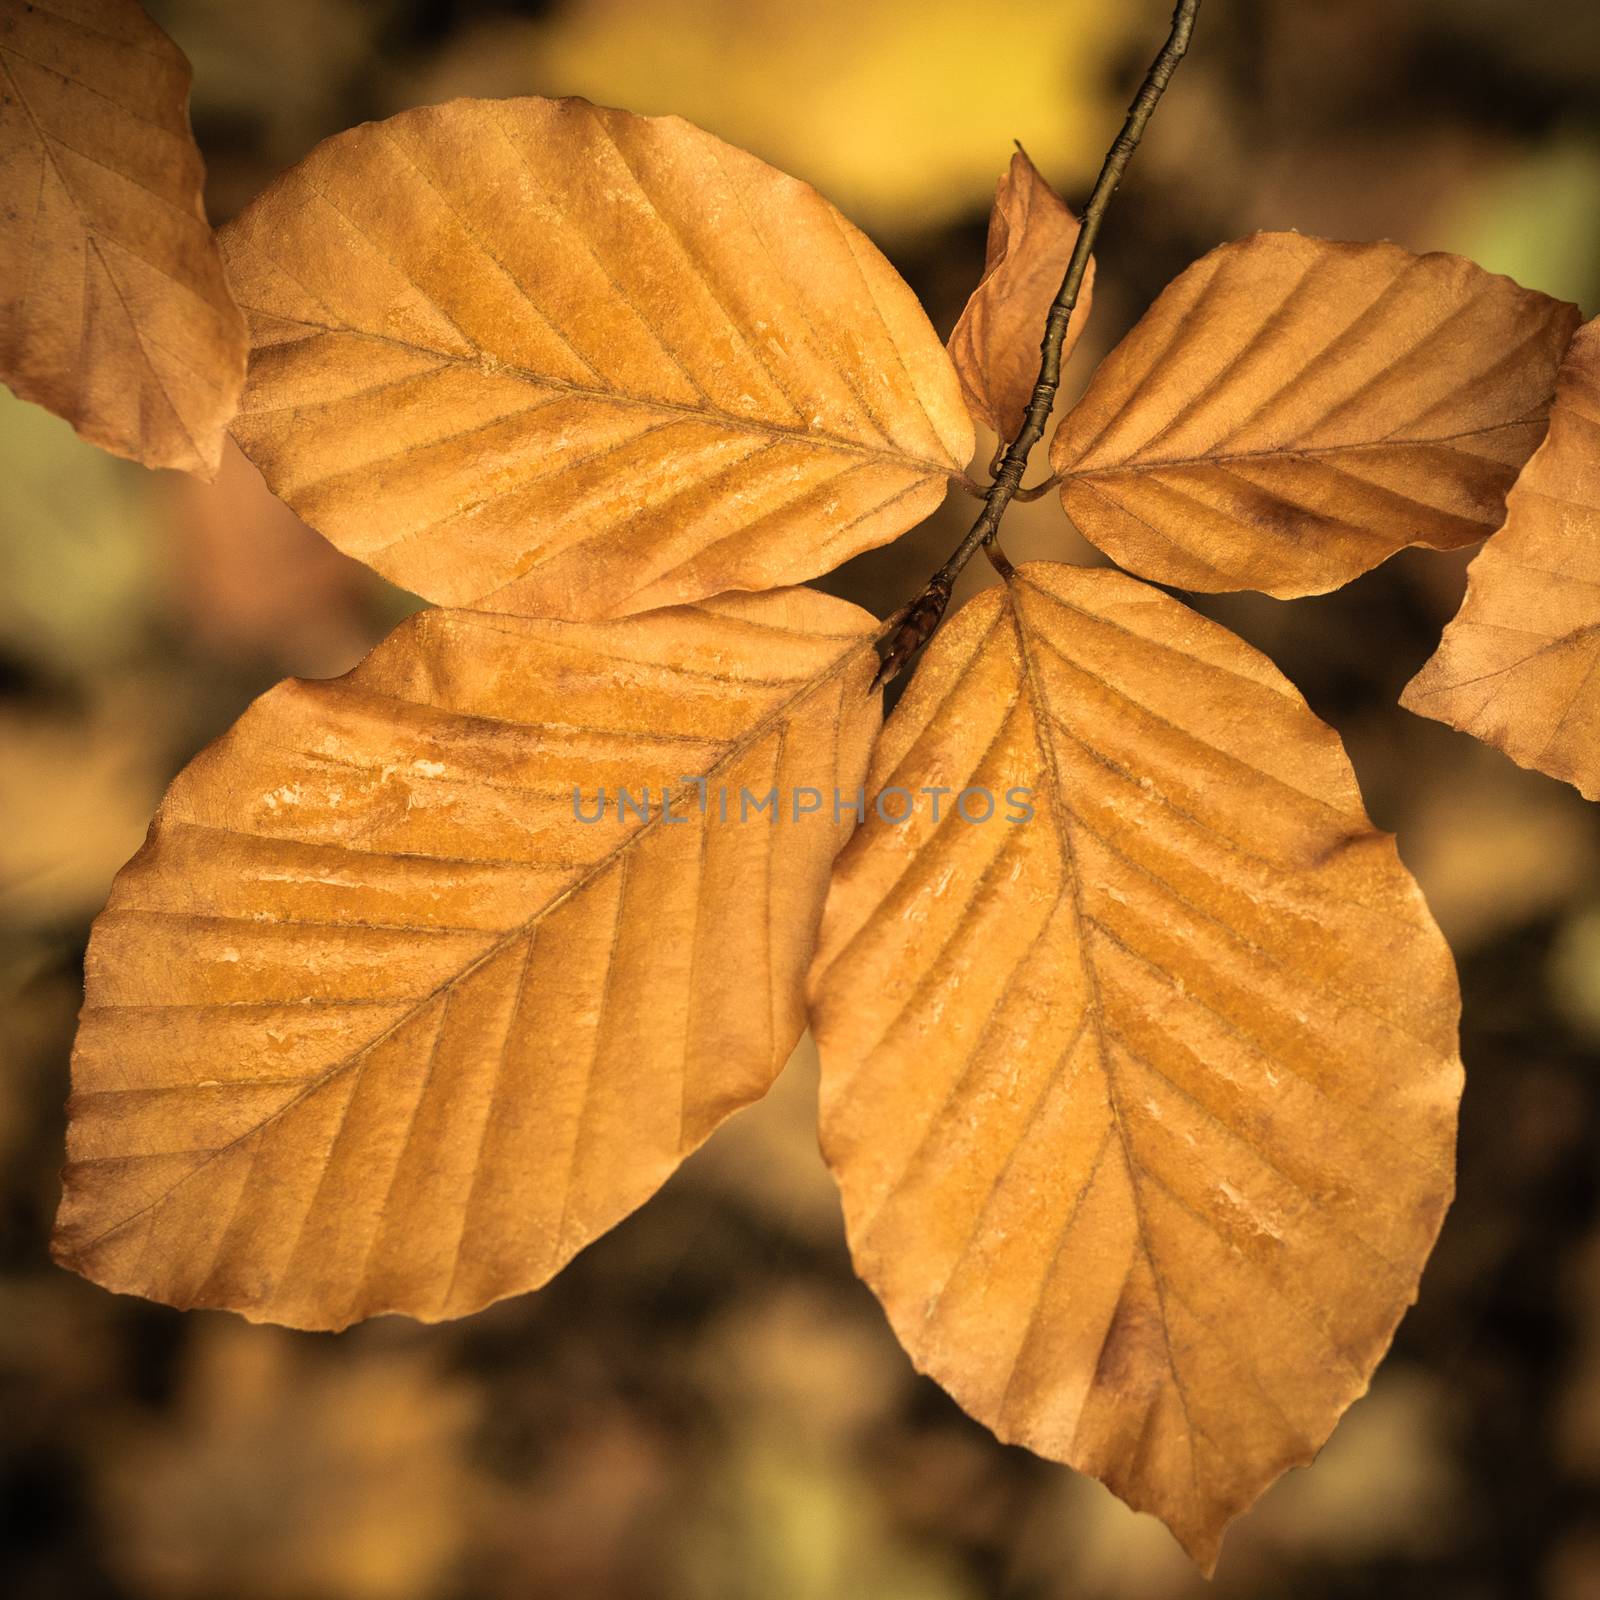 Wet Fall Leaves by mrdoomits